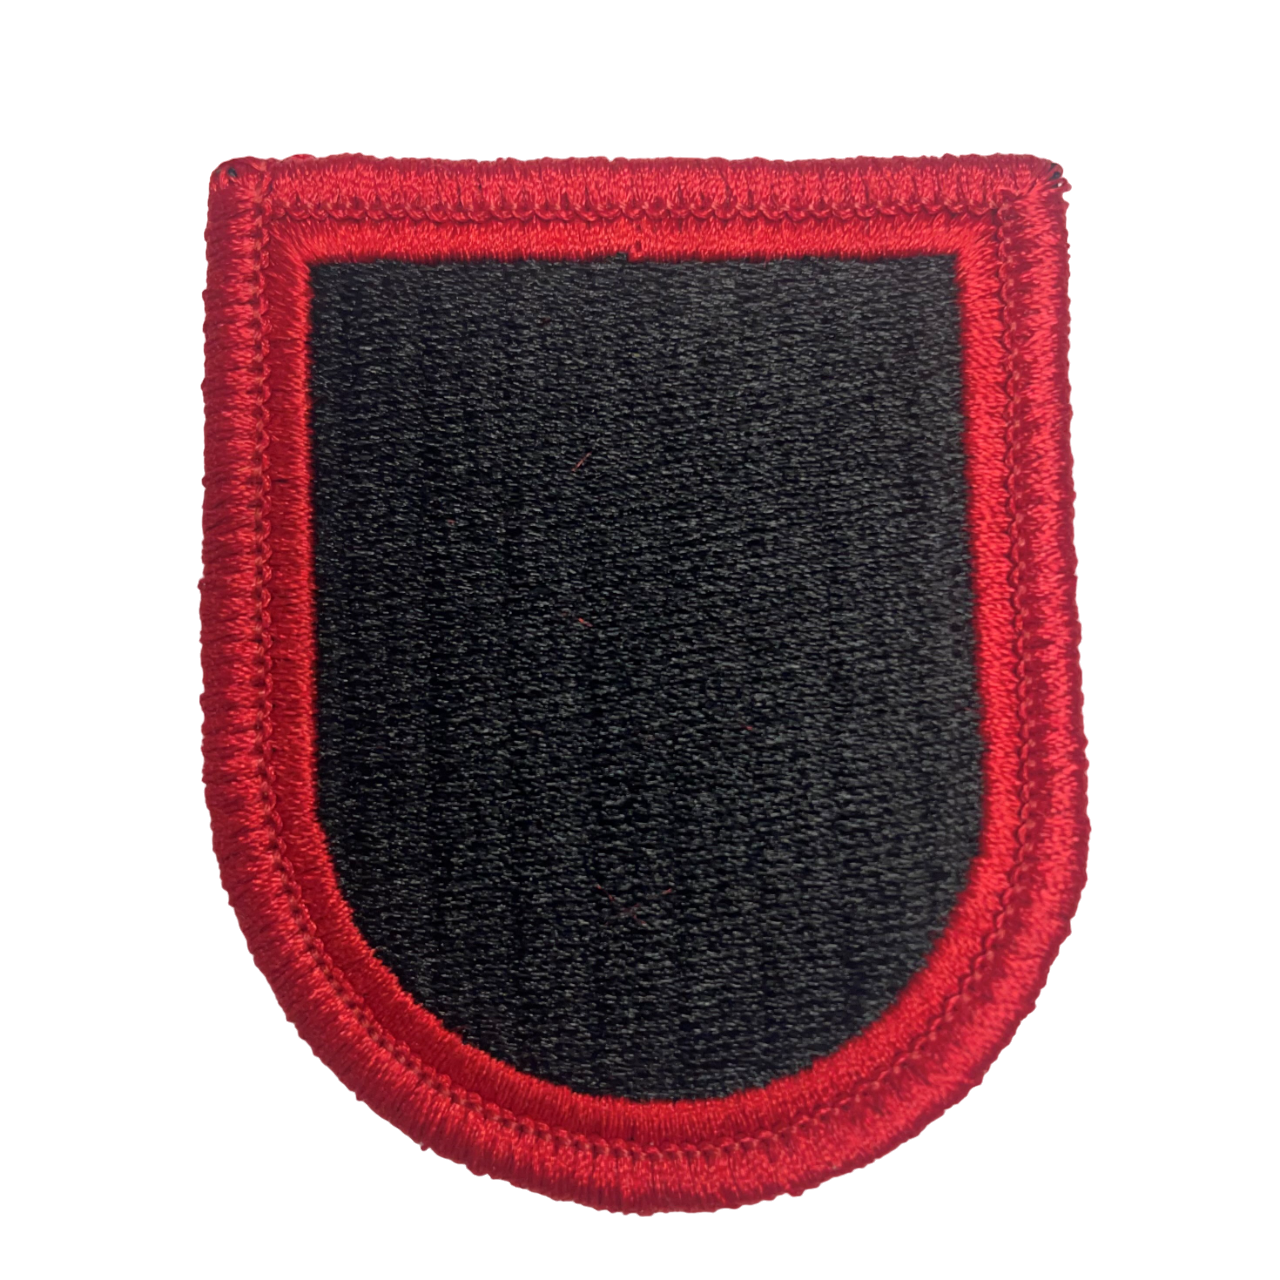 U.S. Army Special Operations Command Beret Flash